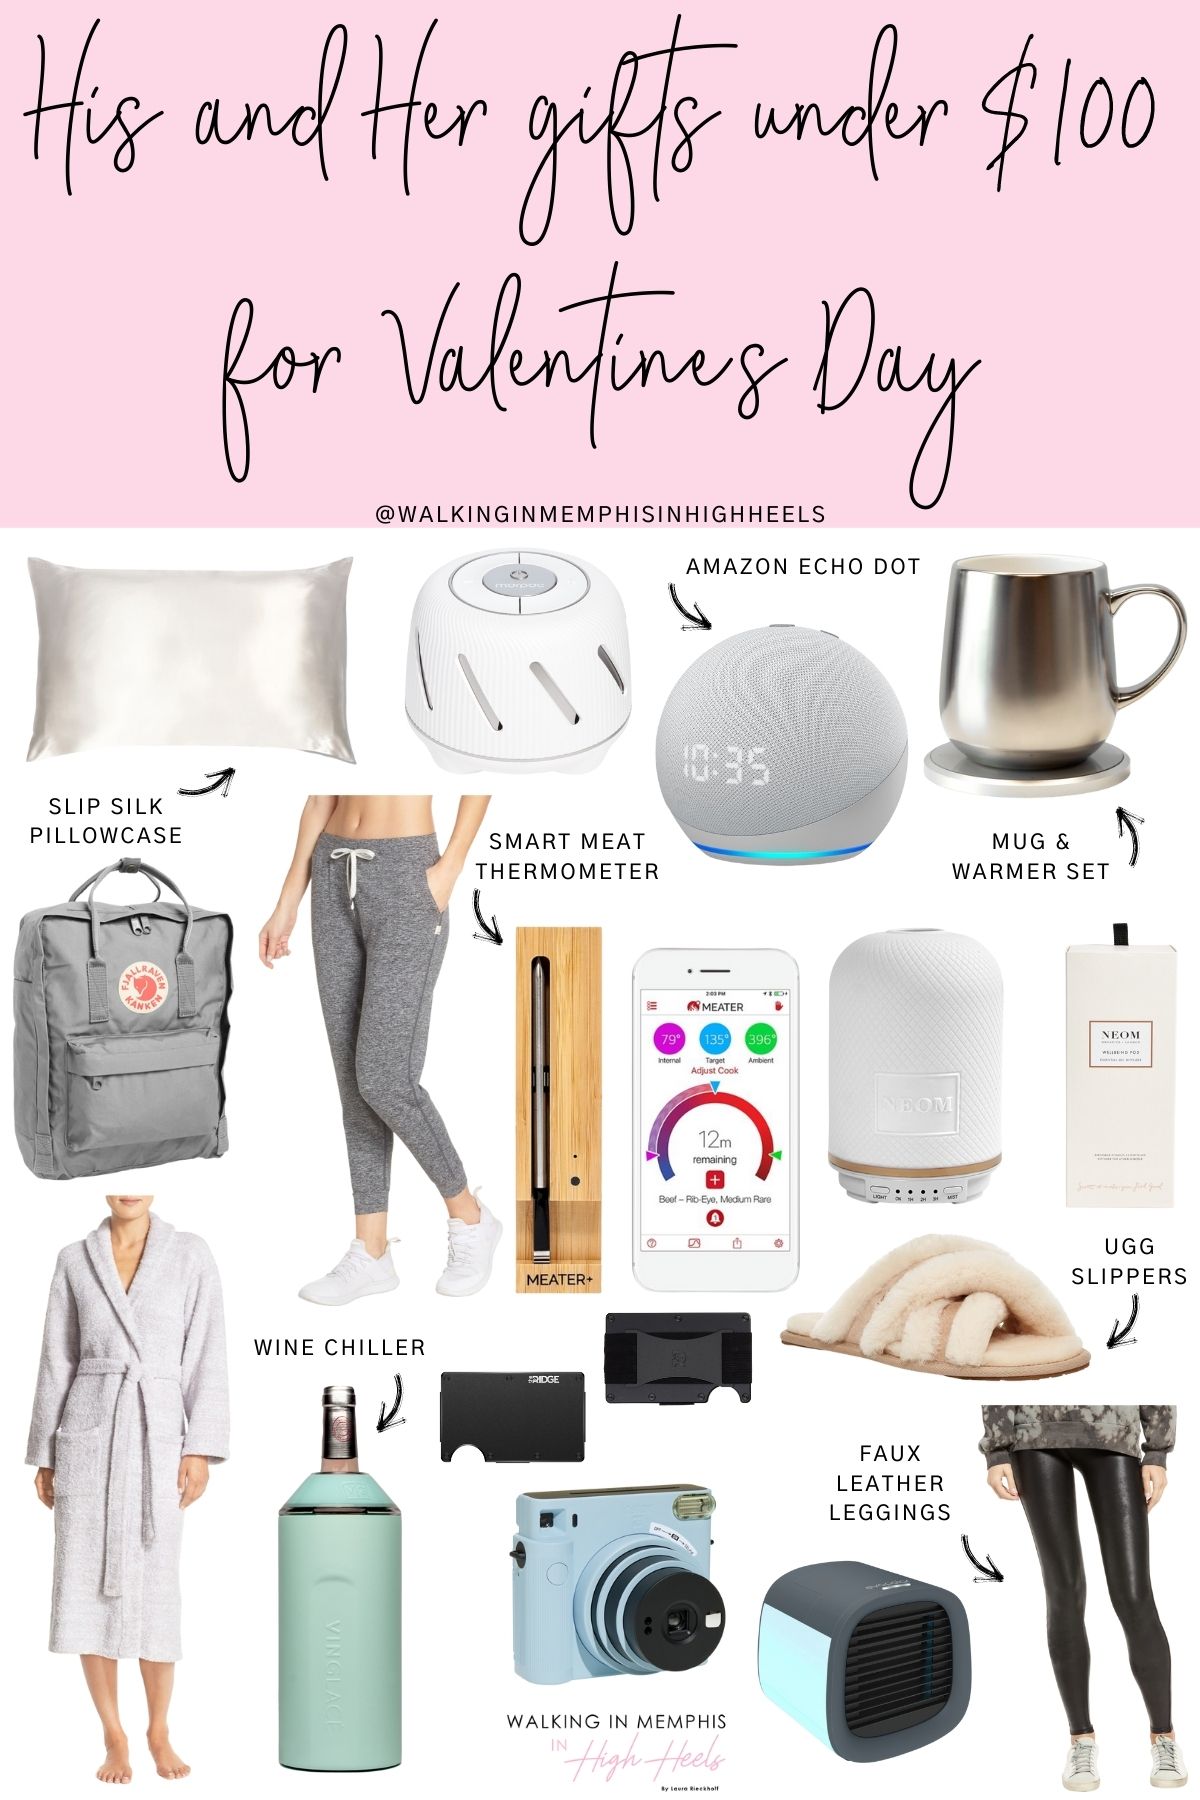 Valentine's Day Gifts Under $100 for him and her featured by top US lifestyle blogger, Walking in Memphis in High Heels.